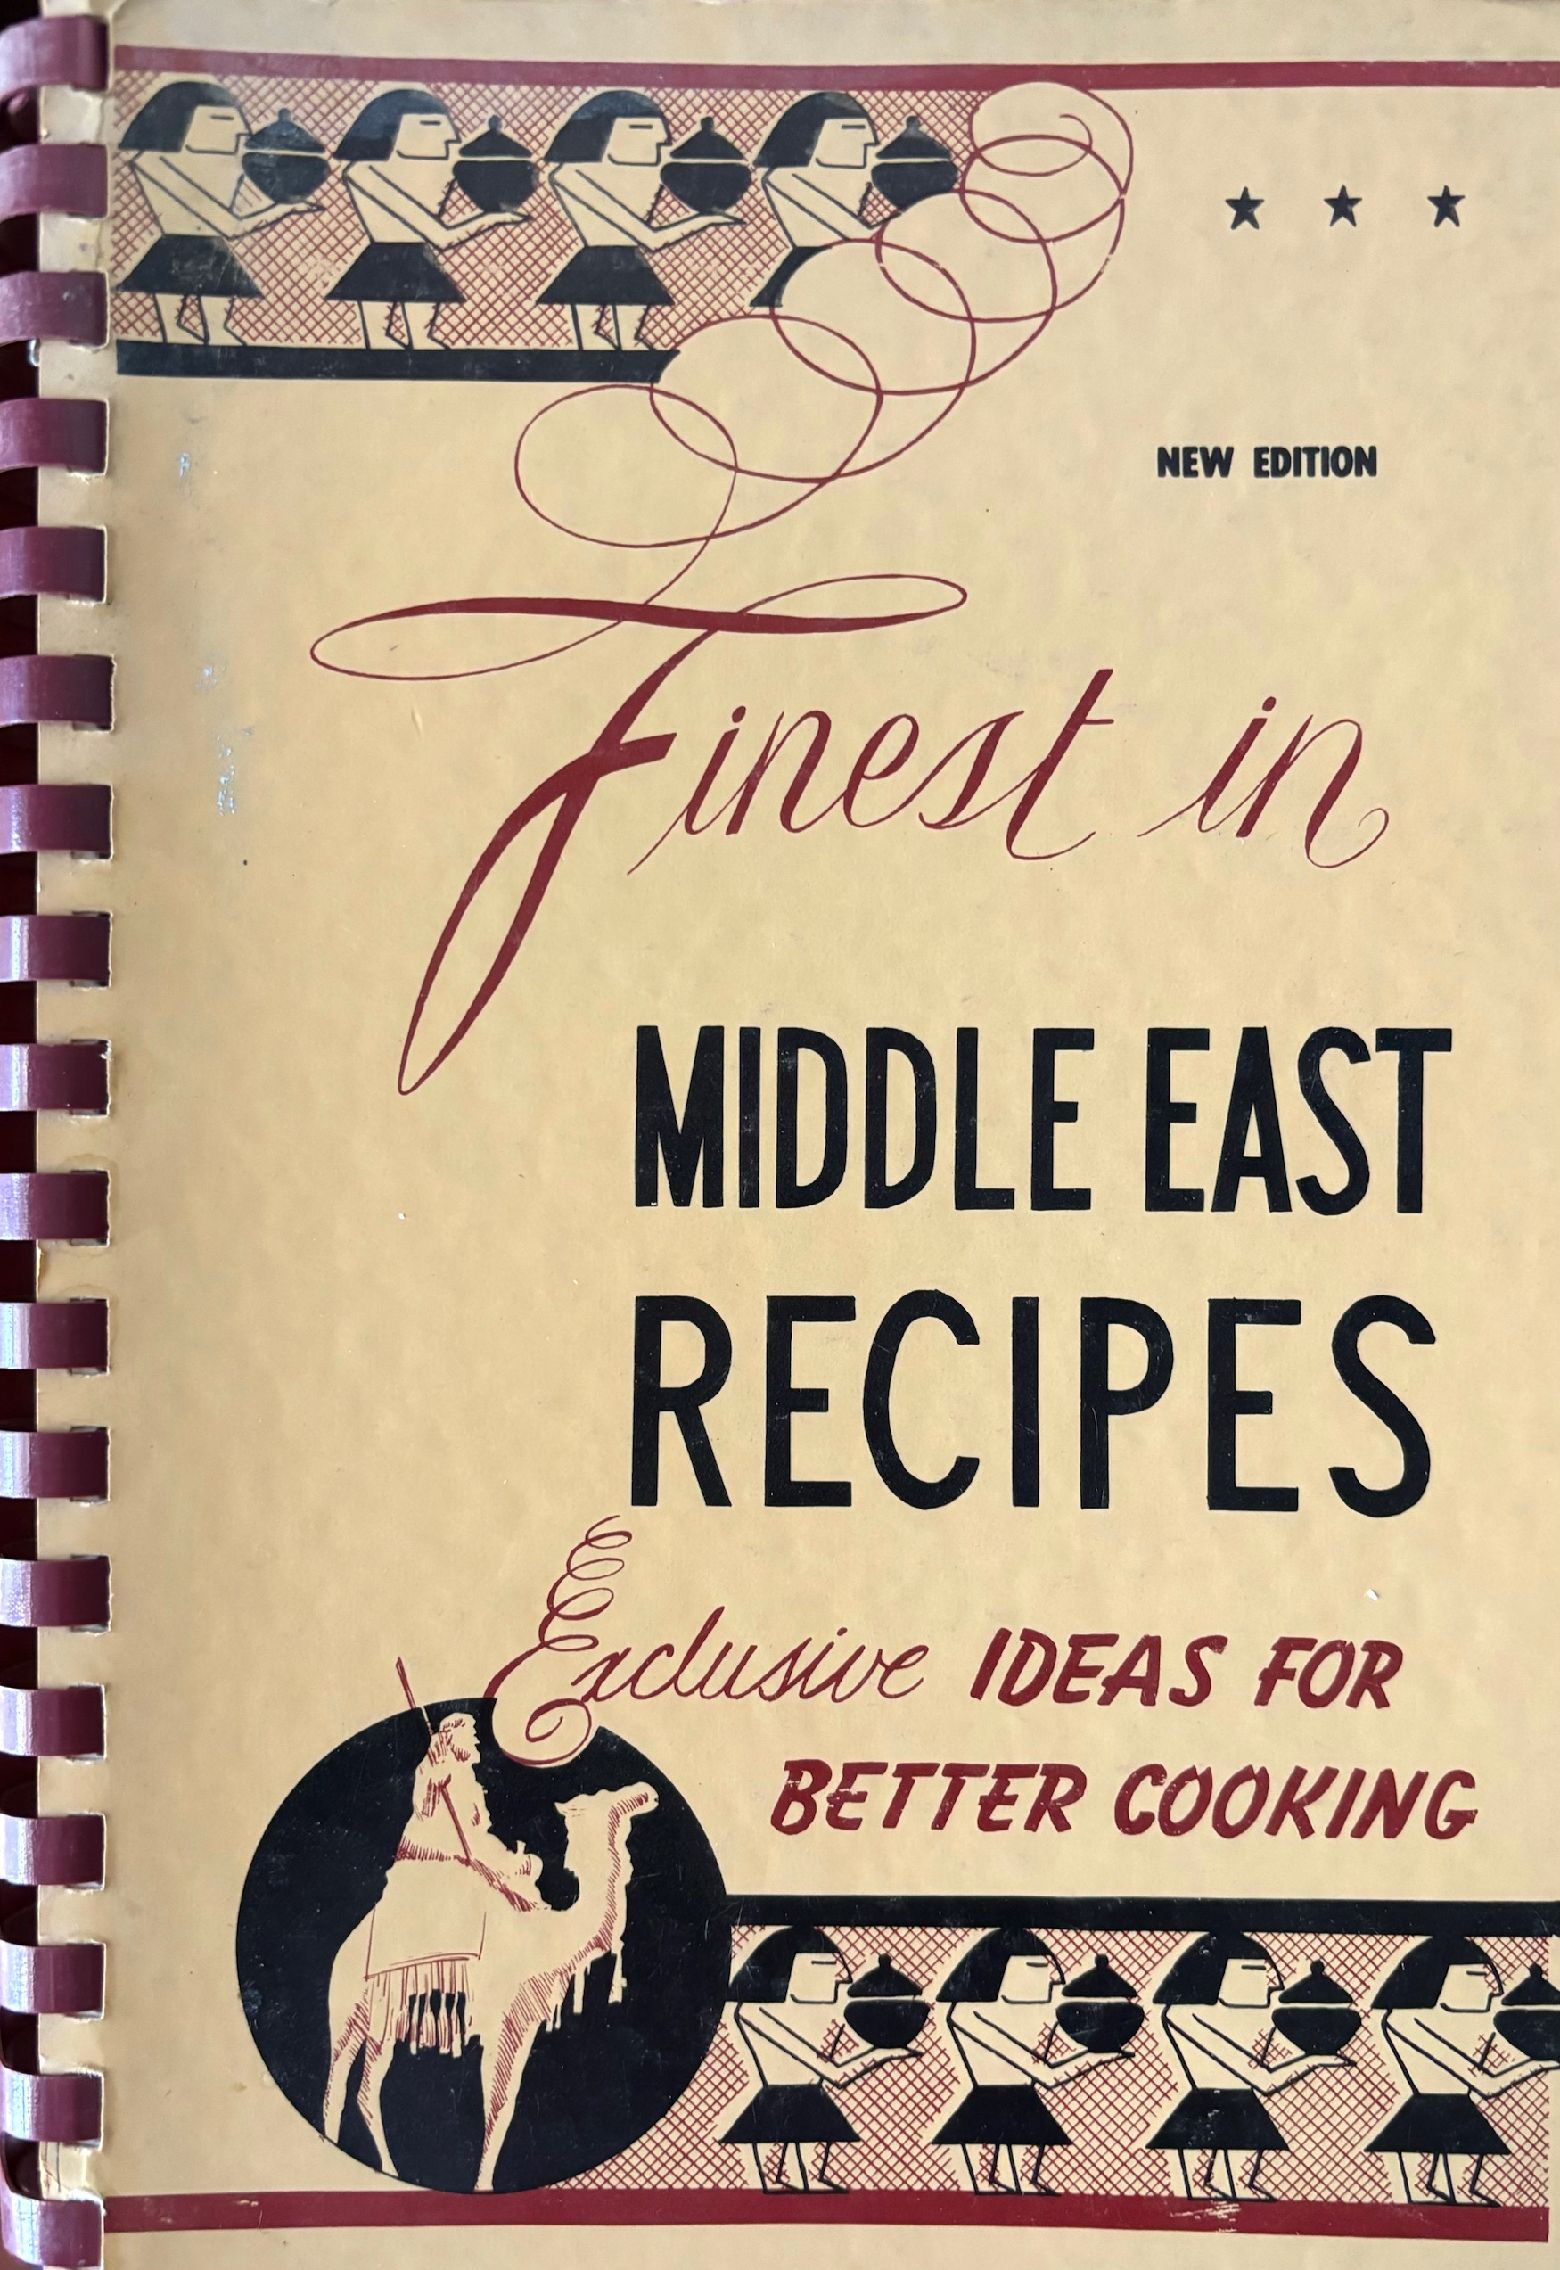 (*NEW ARRIVAL*) Yasmine Betar. Finest in Middle East Recipes. *Signed*